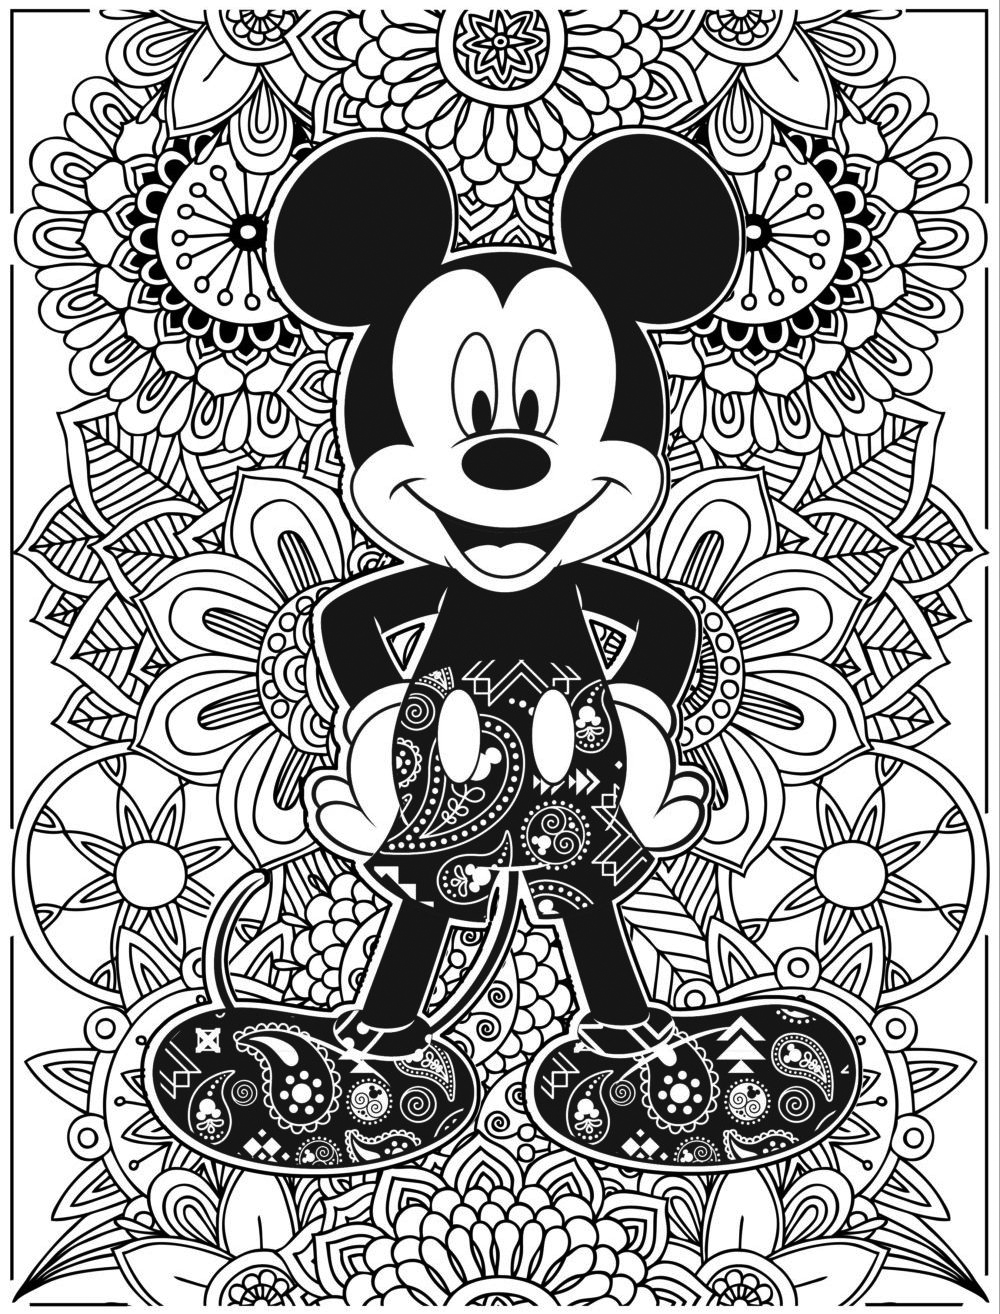 25 Printable Disney Coloring Sheets So You Can FINALLY Have a Few